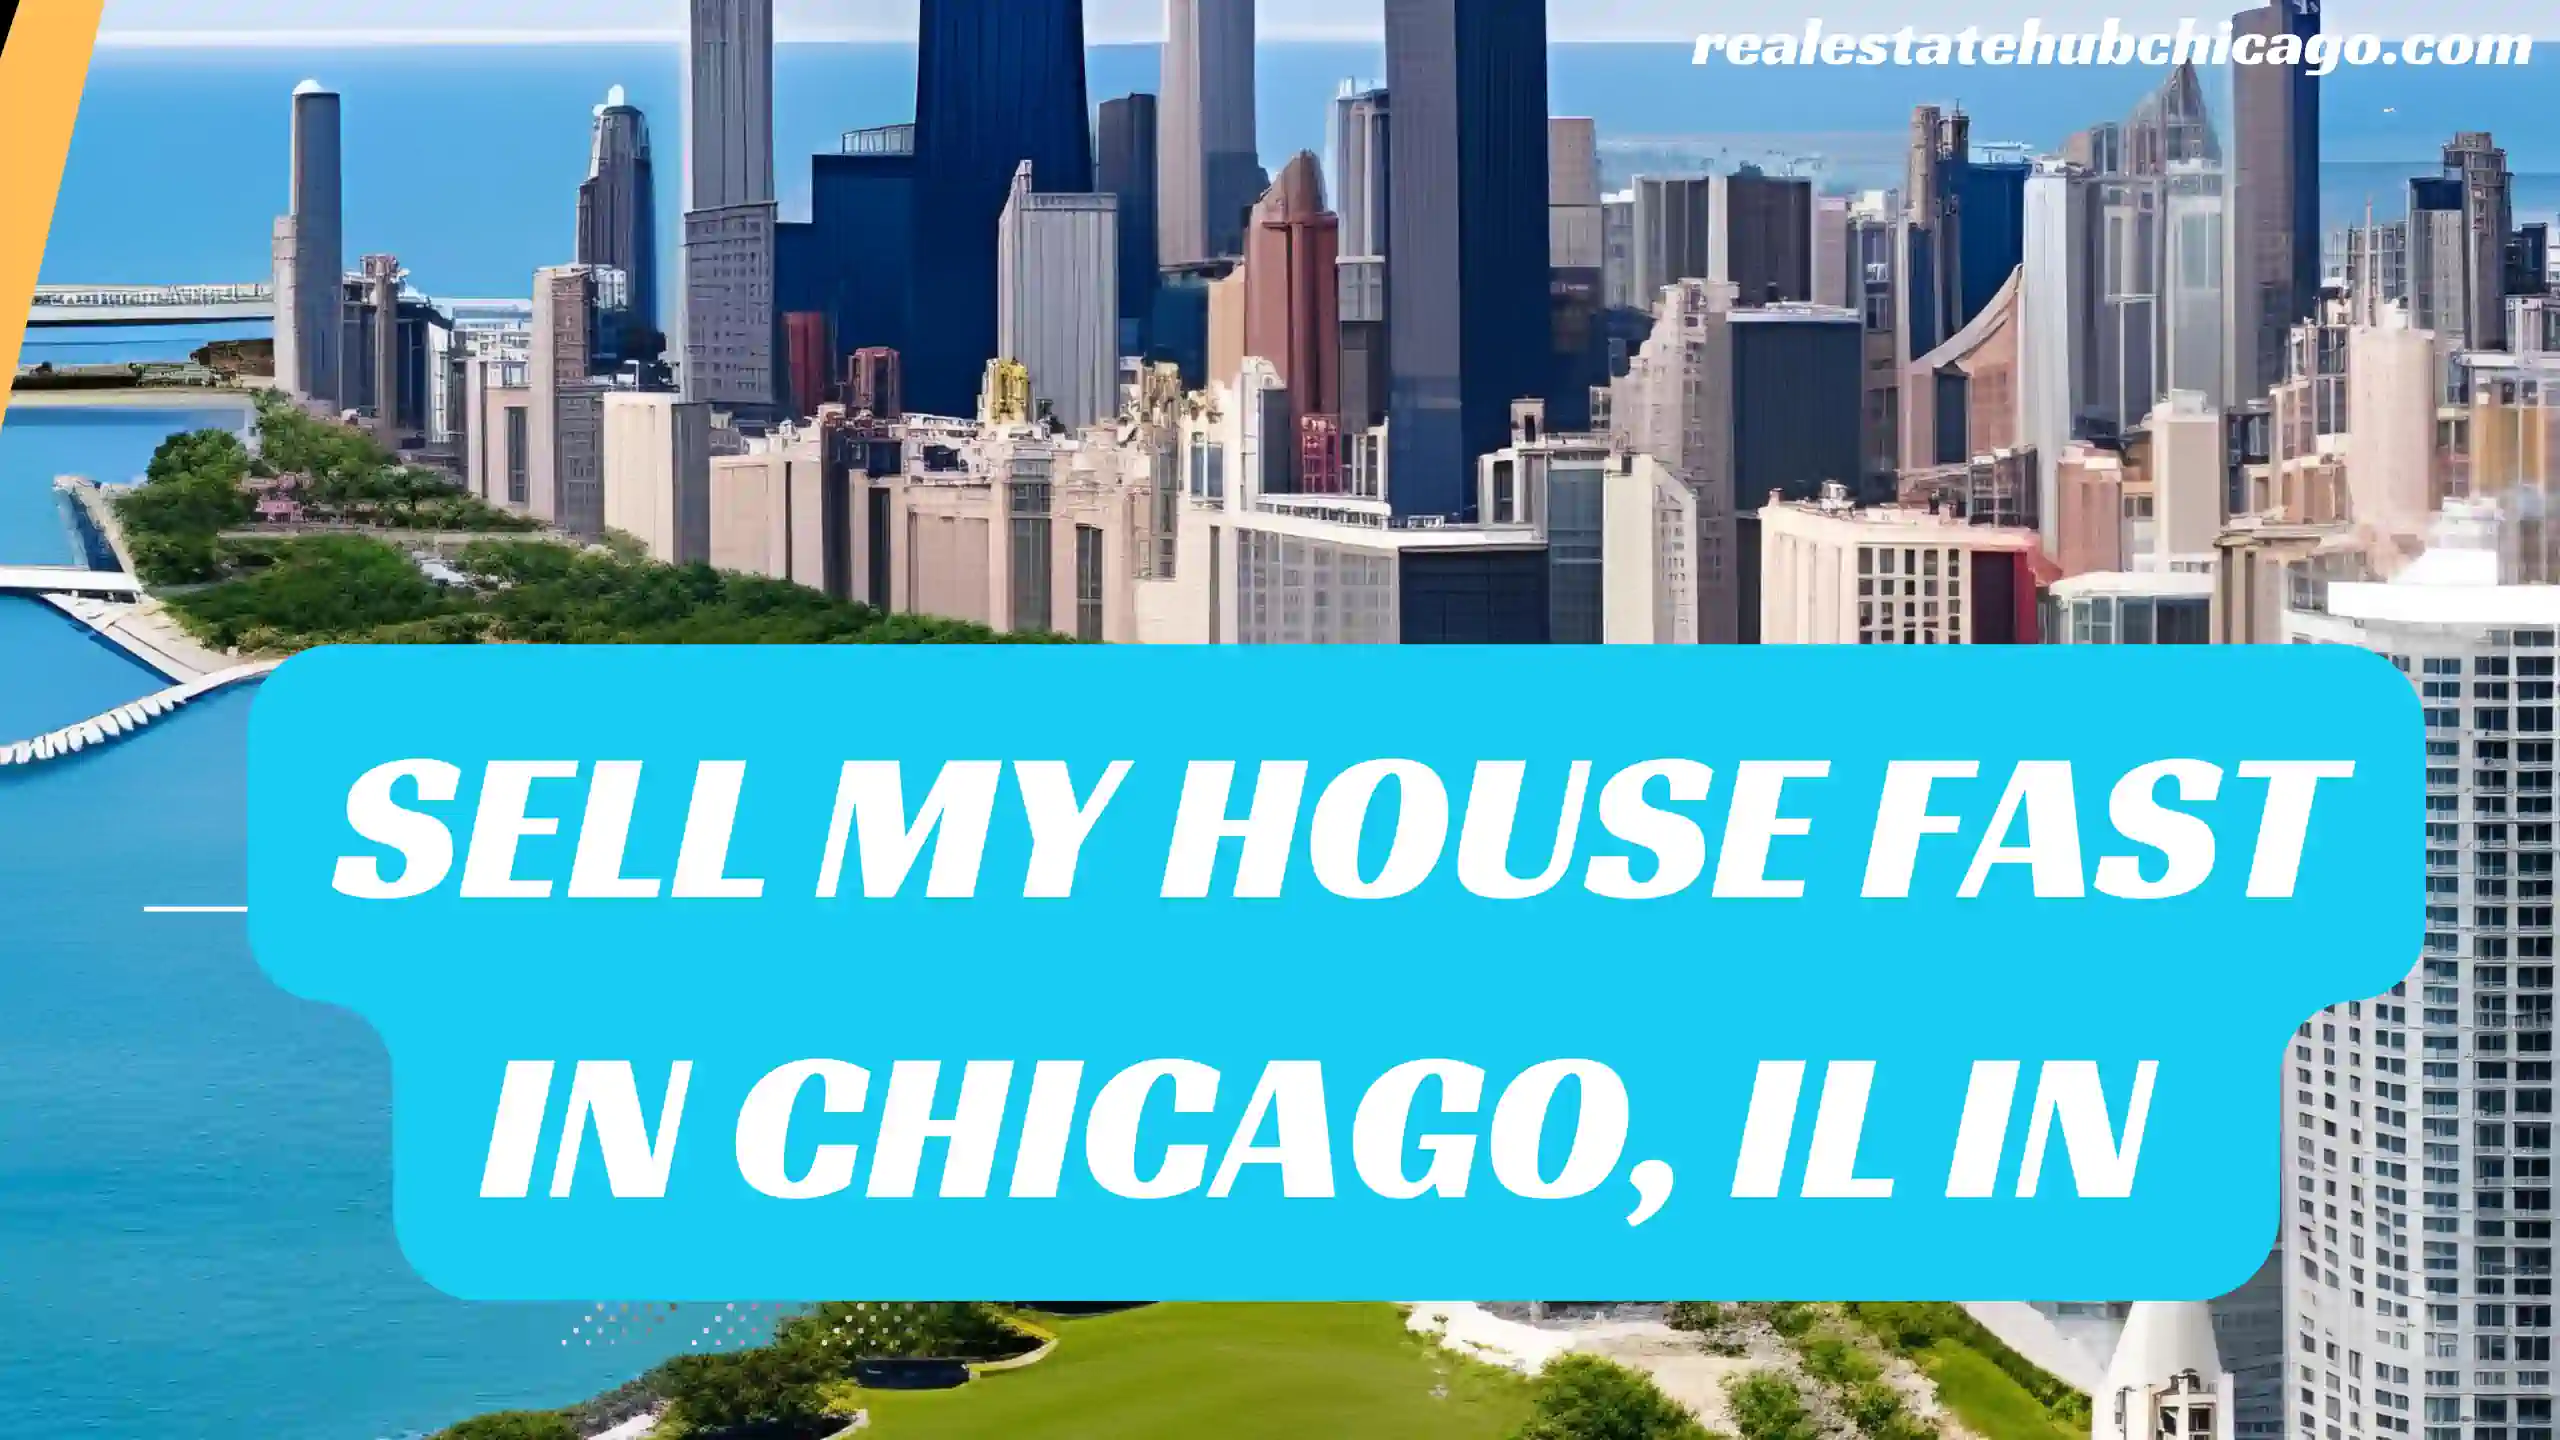 Sell My House Fast in Chicago, IL in